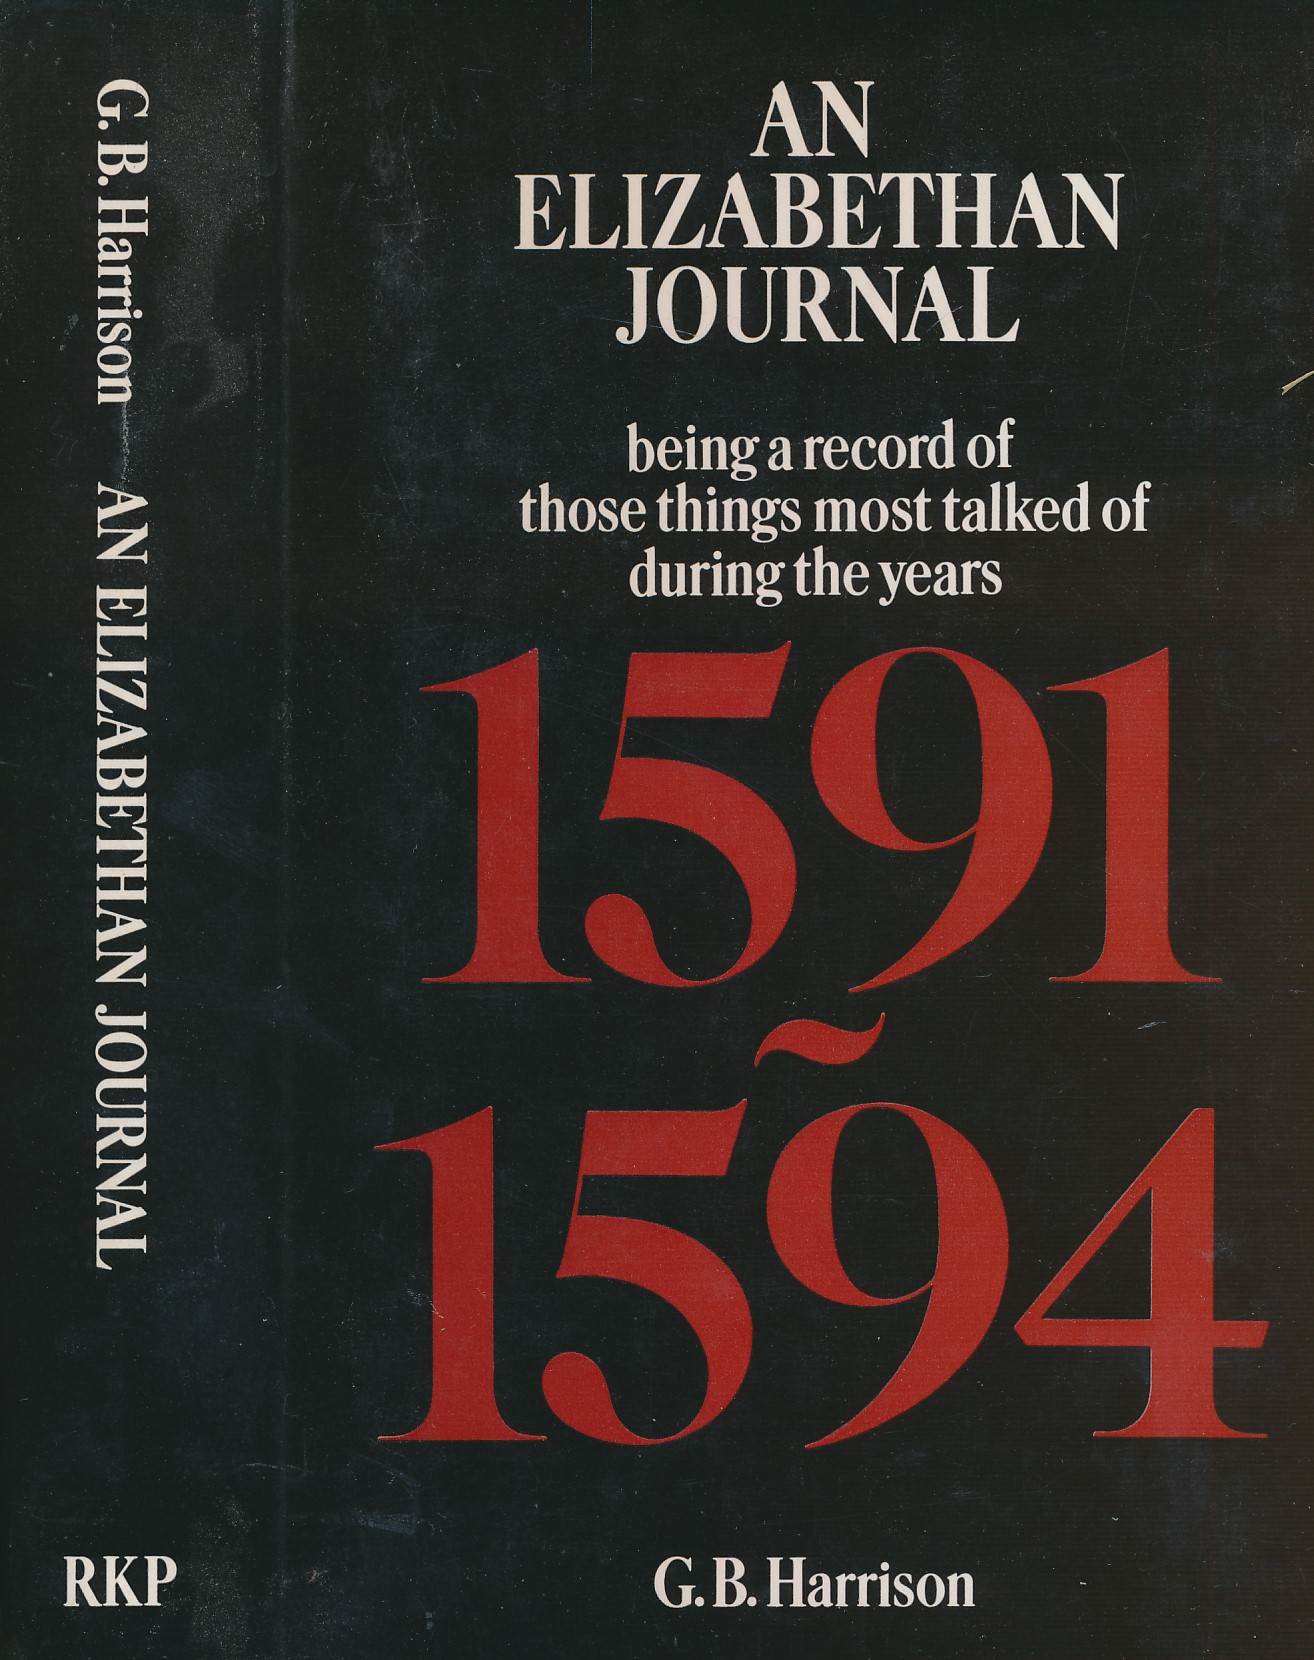 An Elizabethan Journal: Being a Record of Those Things Most Talked of During the Years 1591-1594